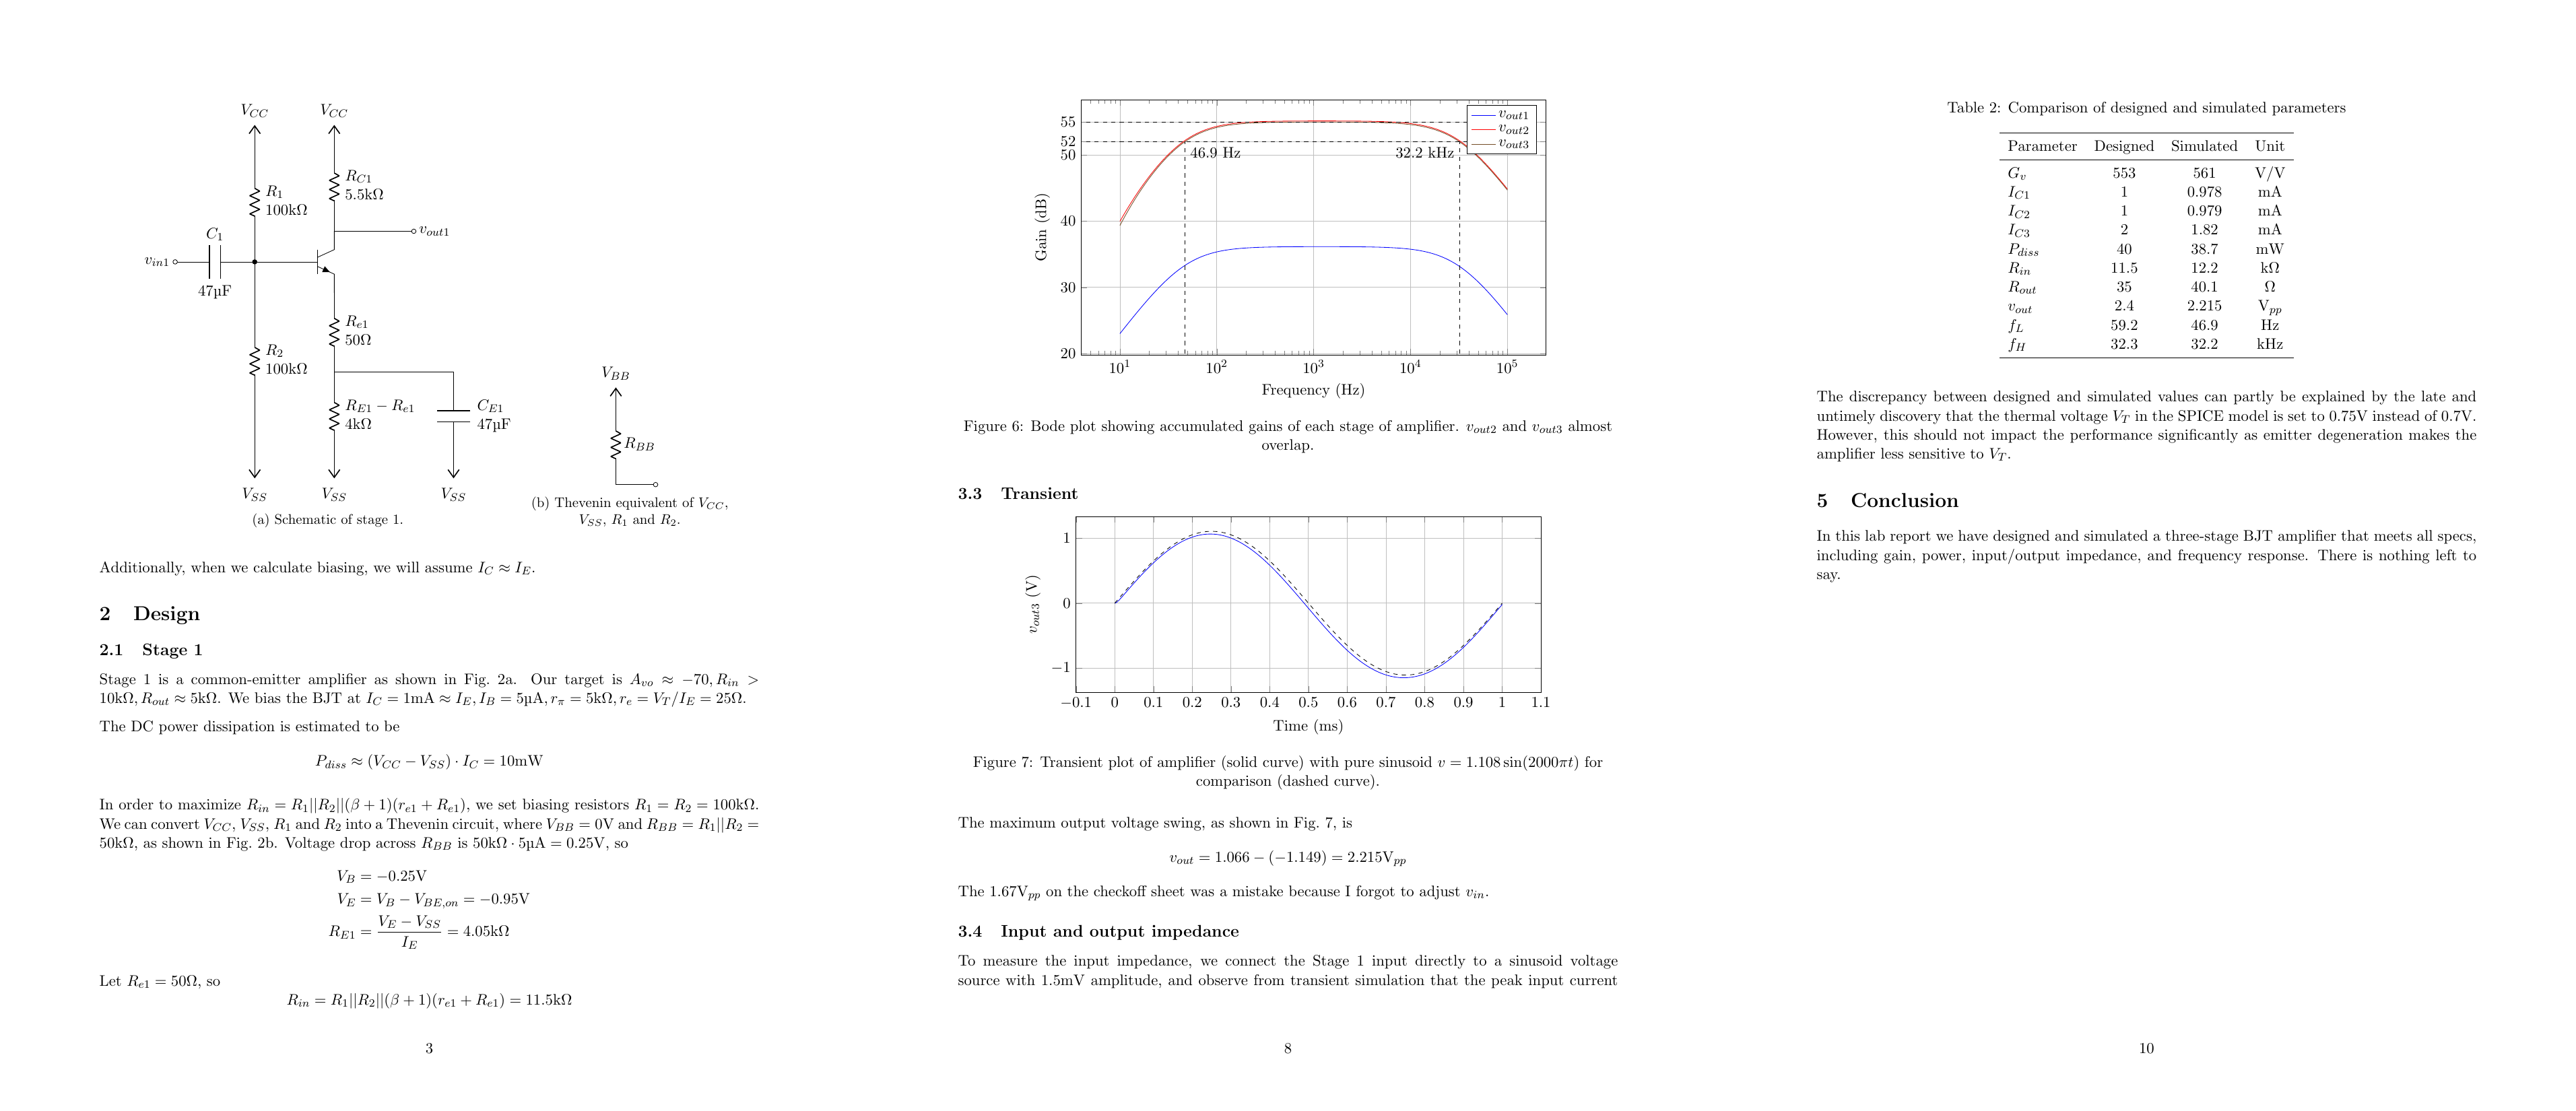 Three pages of my report written with LaTeX, featuring a circuit
schematic, a bode plot, a transient plot, and
a table